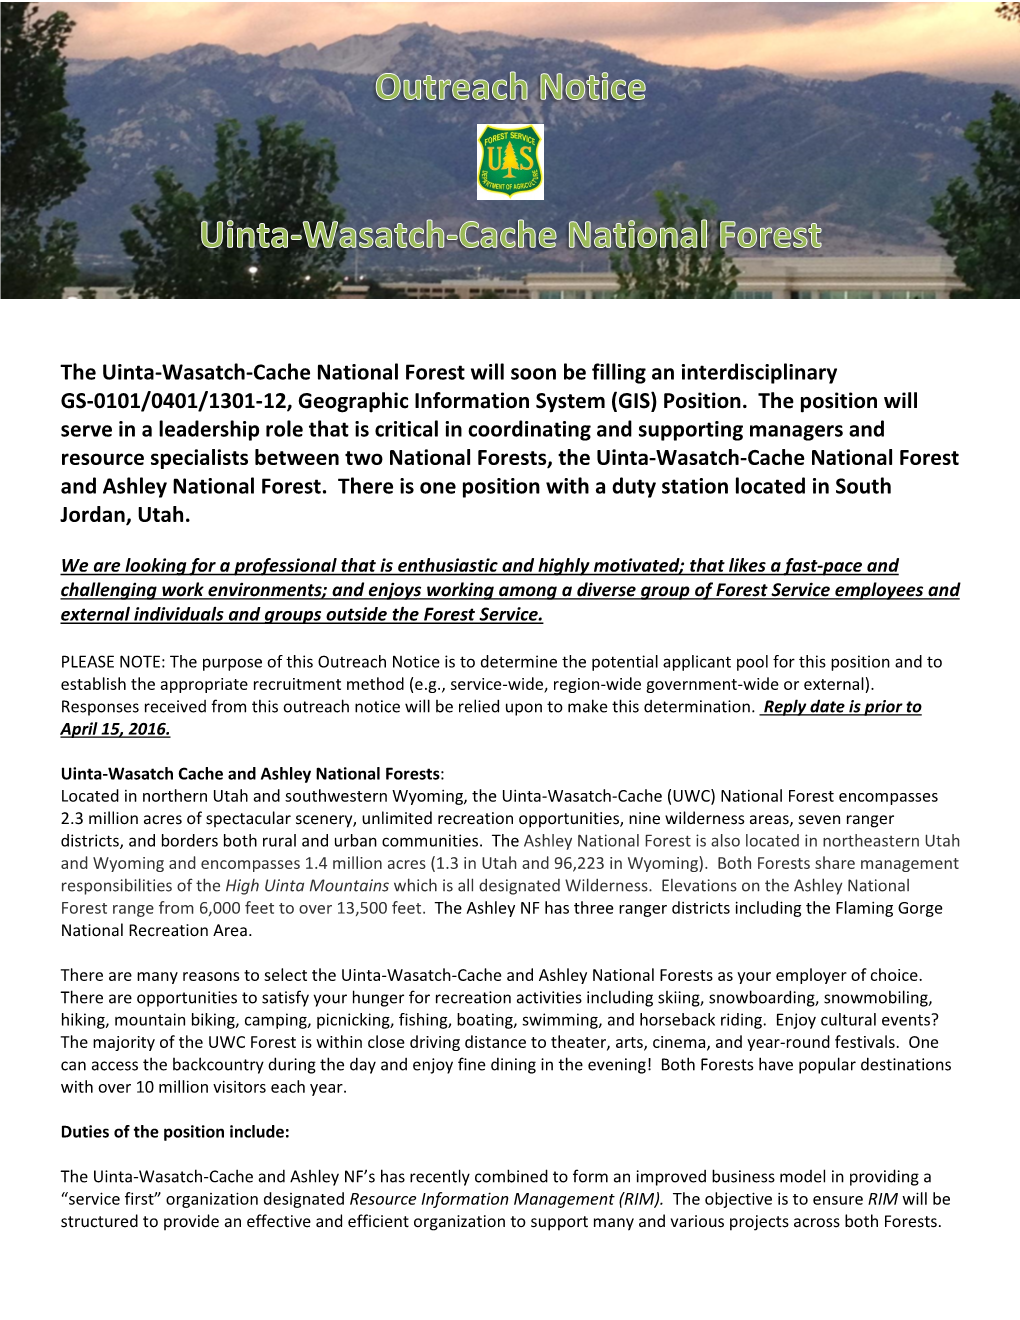 The Uinta-Wasatch-Cache National Forest Will Soon Be Filling an Interdisciplinary GS-0101/0401/1301-12, Geographic Information System (GIS) Position